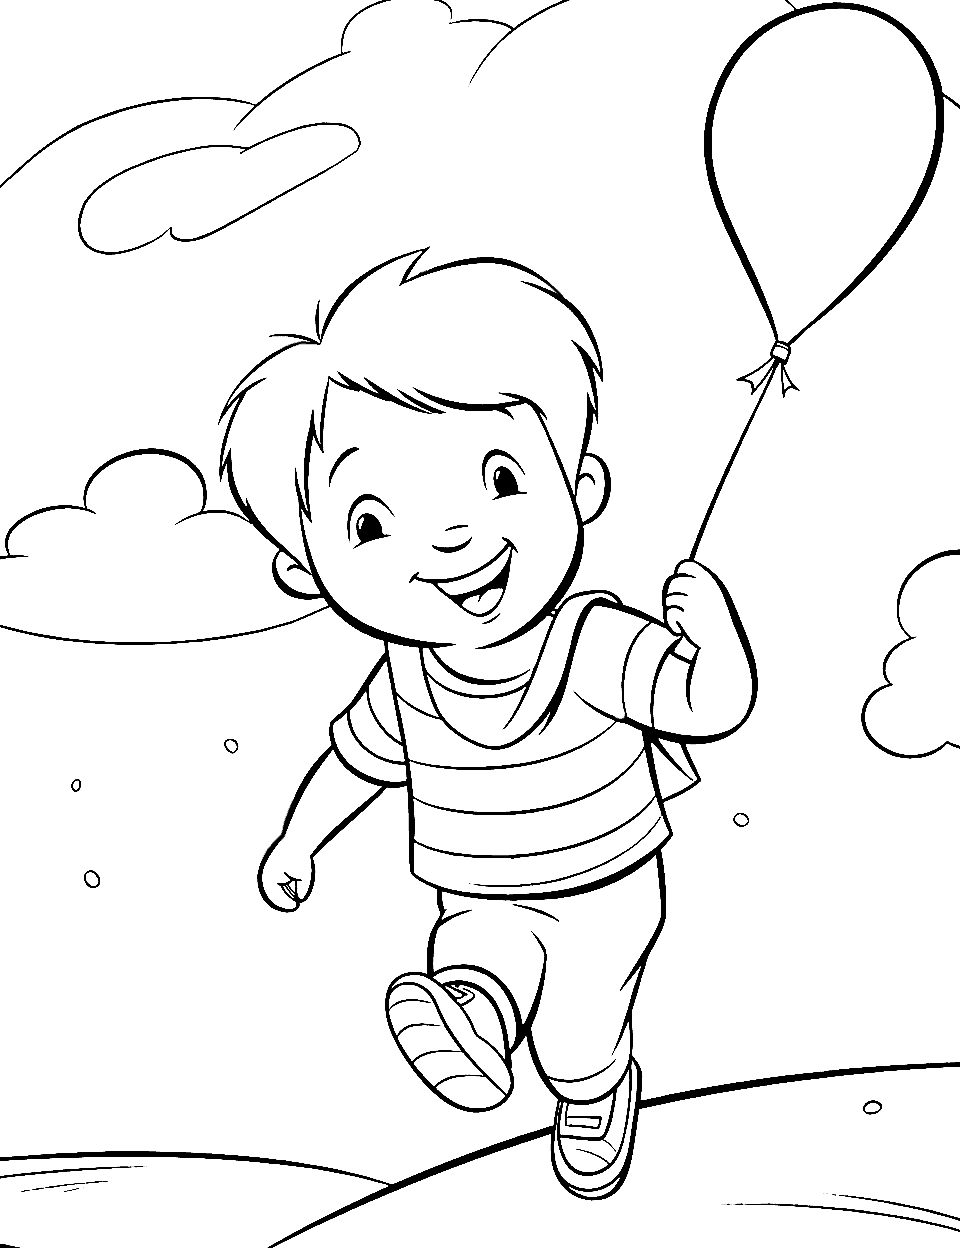 Baloon Flying Day Coloring Page - Christopher Robin running with a colorful balloon flying in the sky above him.